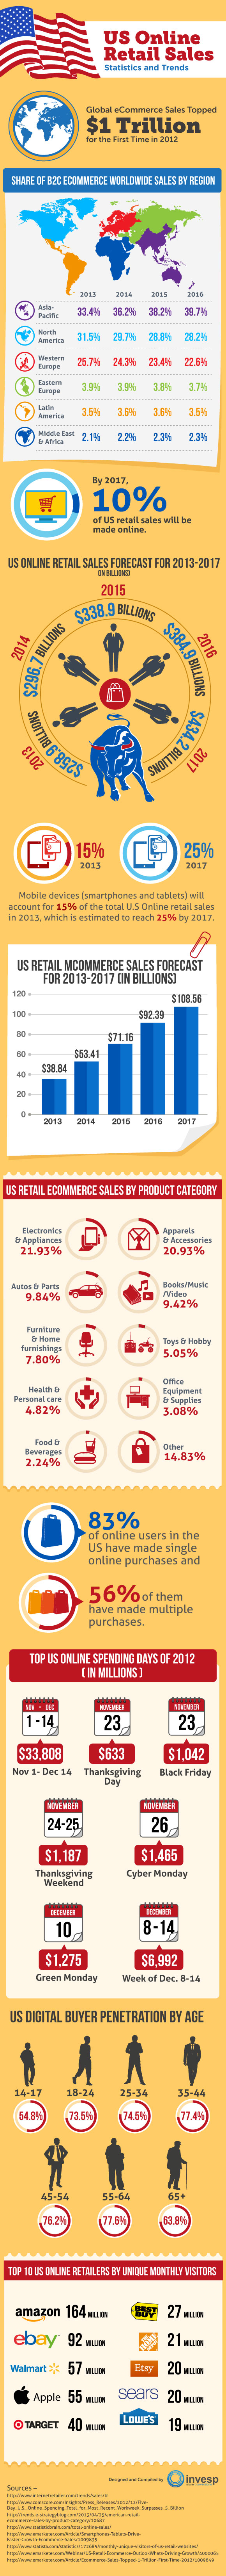 us-online-retail-sales-statistics-and-trends-infographic_51d840234fe51.jpg